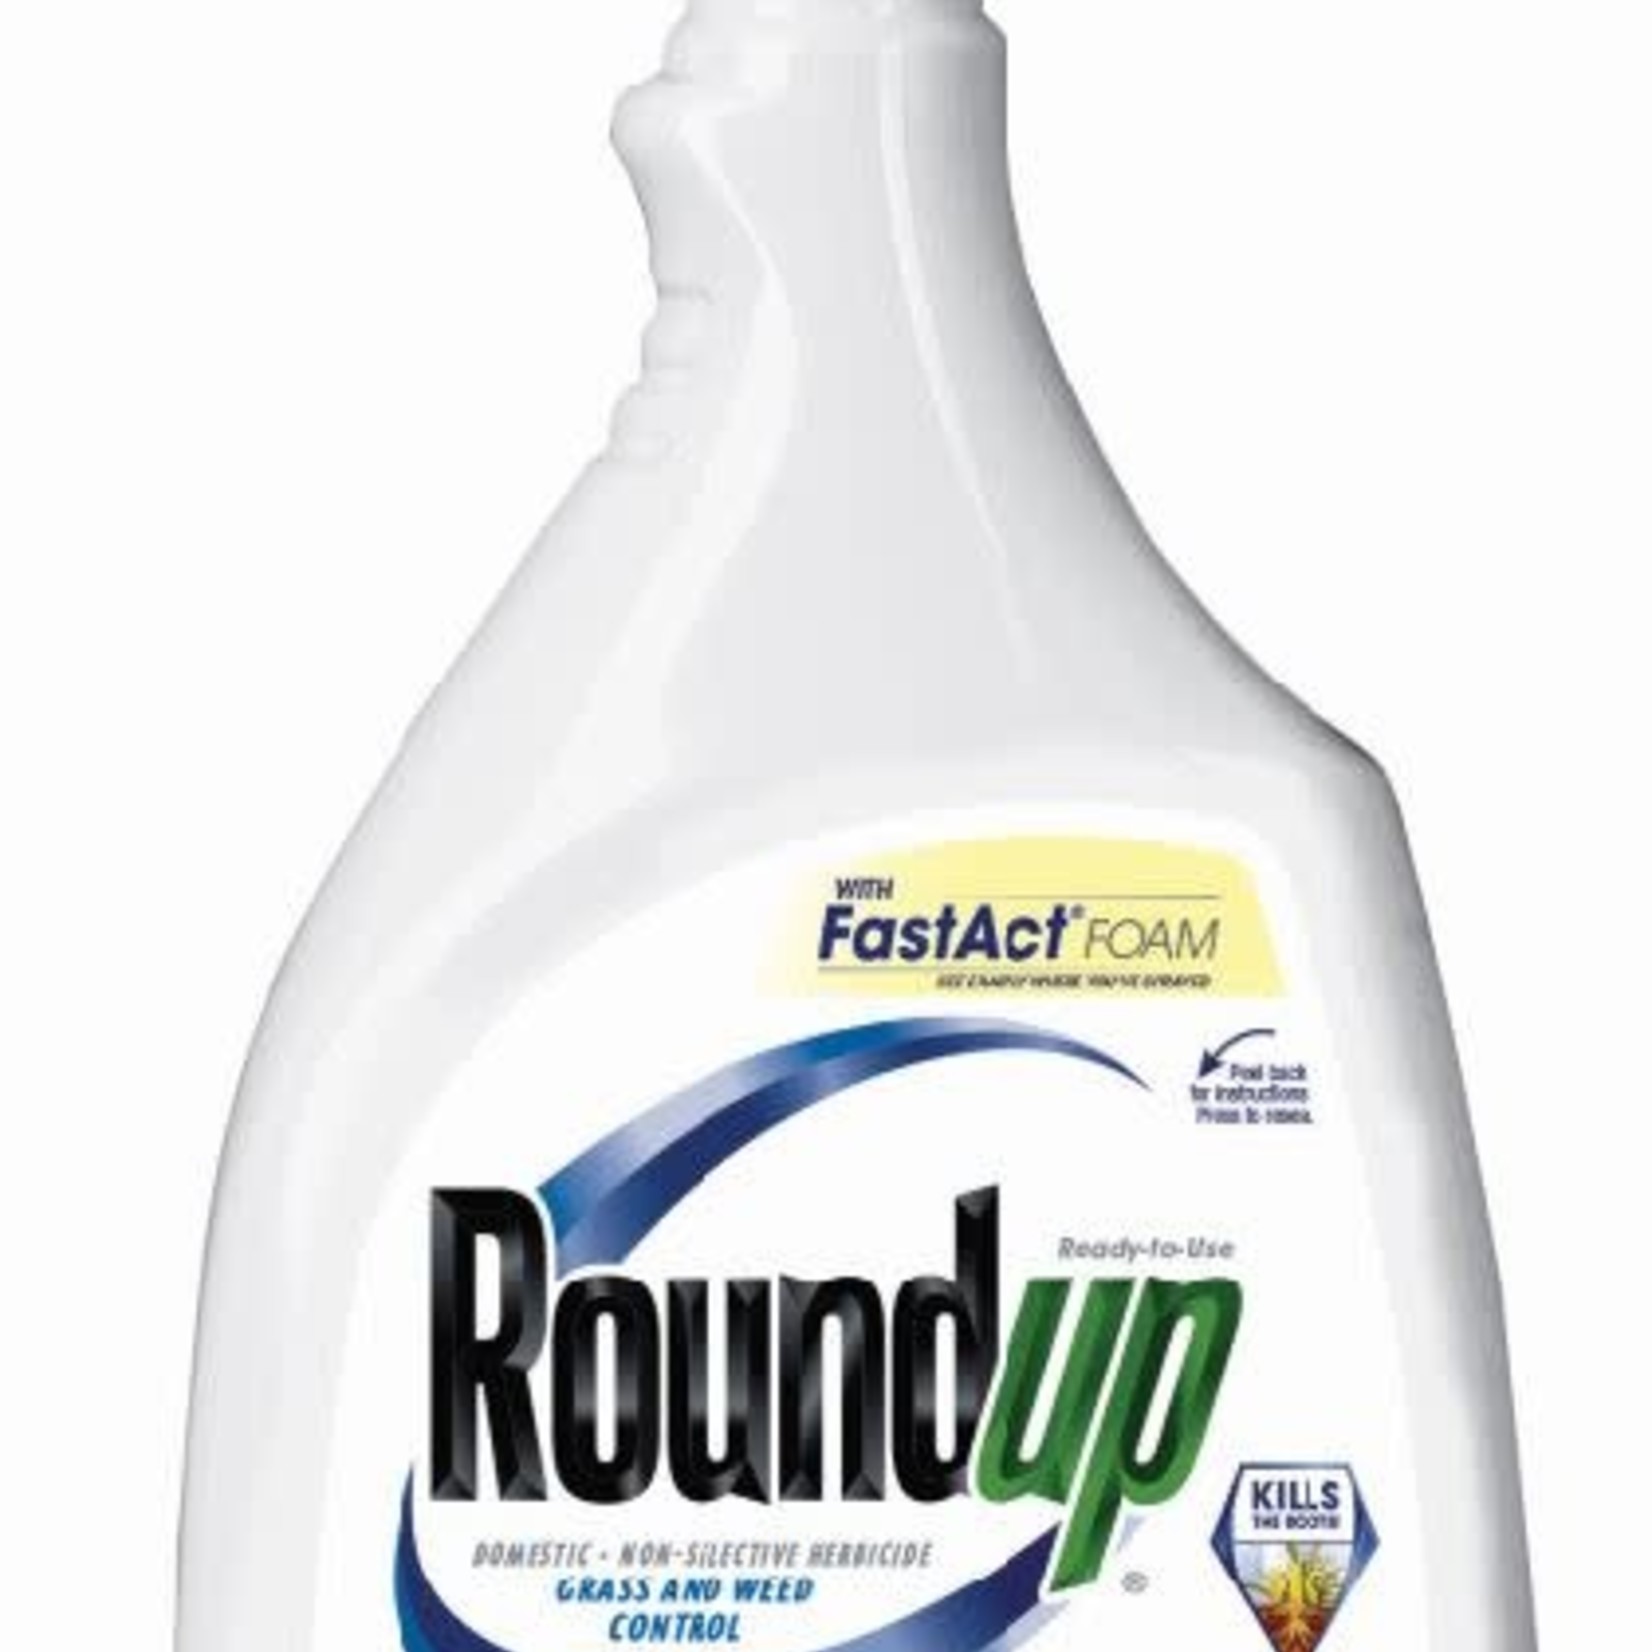 Roundup Roundup Ready-To-Use Non-Selective Herbicide with FastAct Foam - 1L - Case